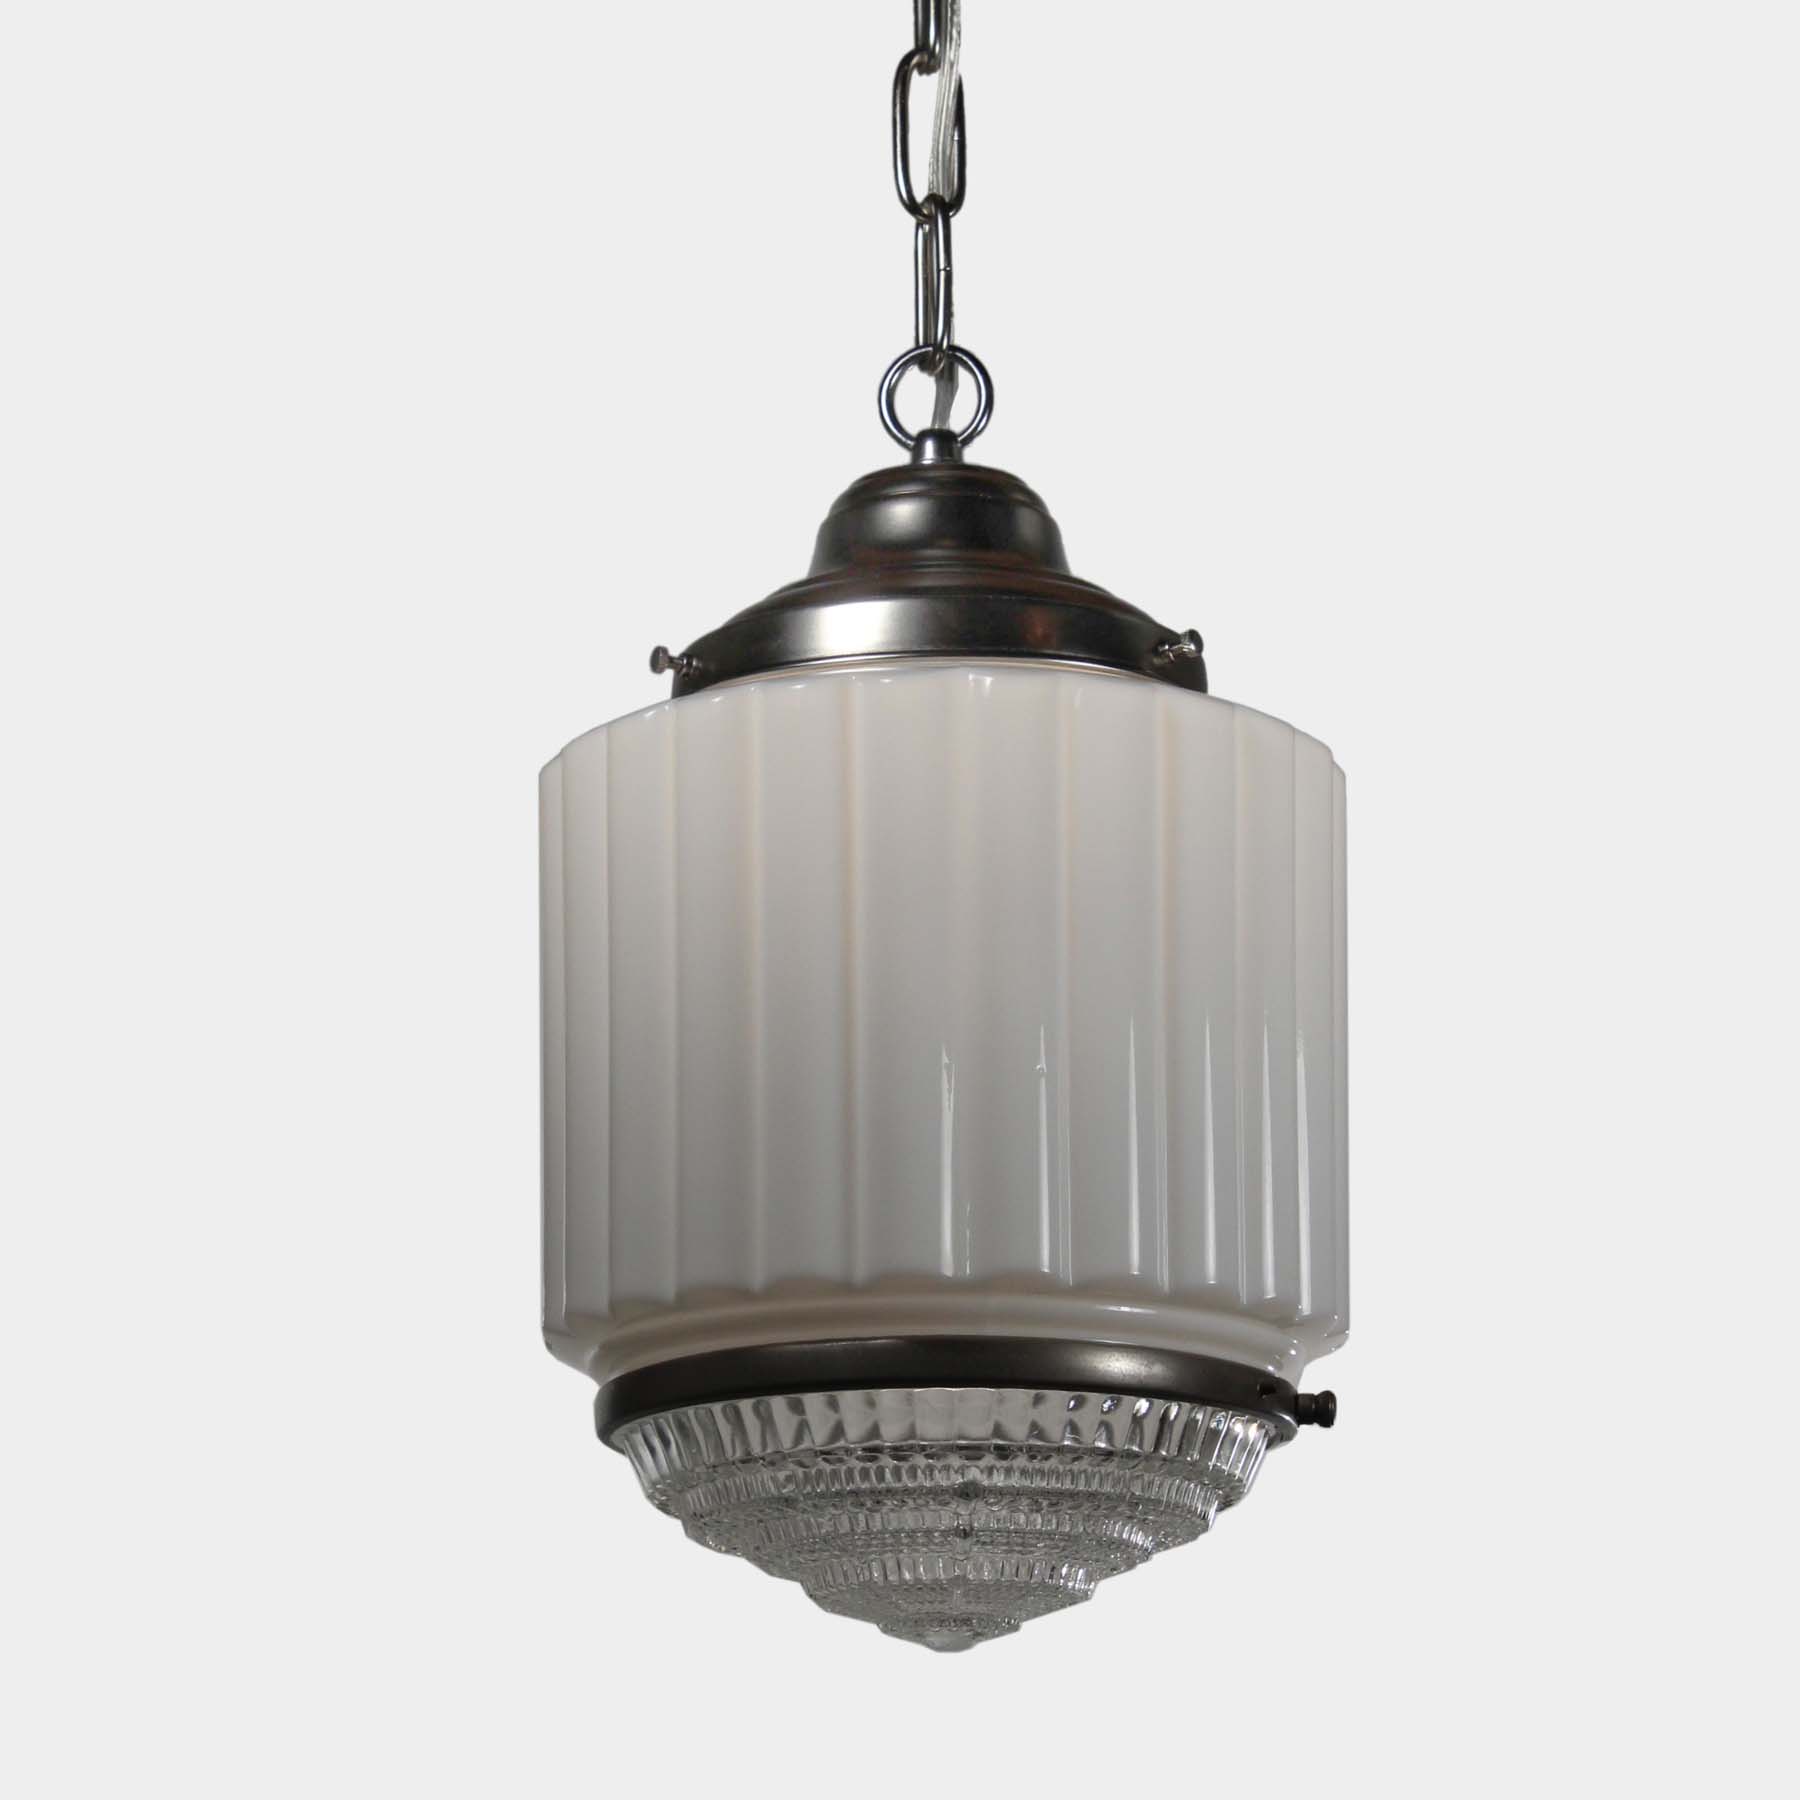 SOLD Art Deco Skyscraper Pendant Light with Two-Part Prismatic Shade, Antique Lighting-70521